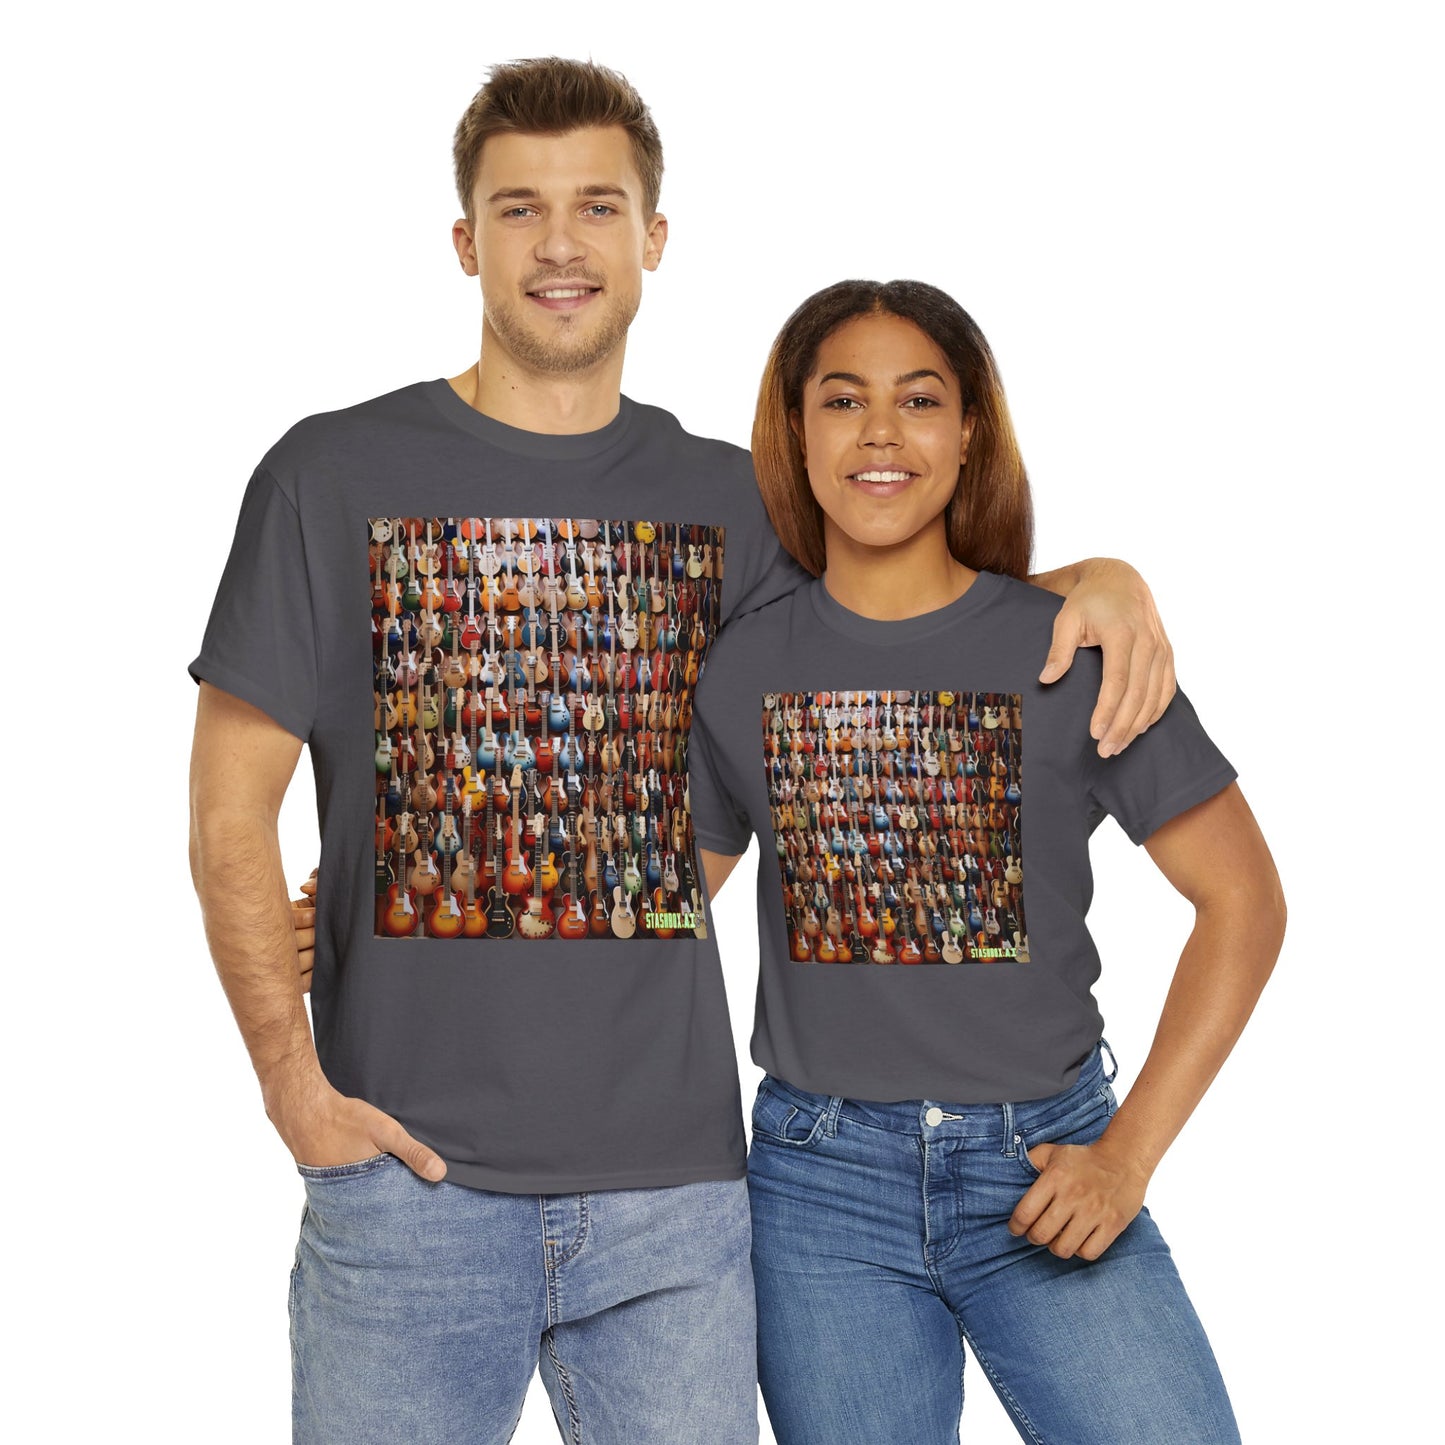 Unisex Adult Size Heavy Cotton Tee Wall of Guitars 005 T-Shirt